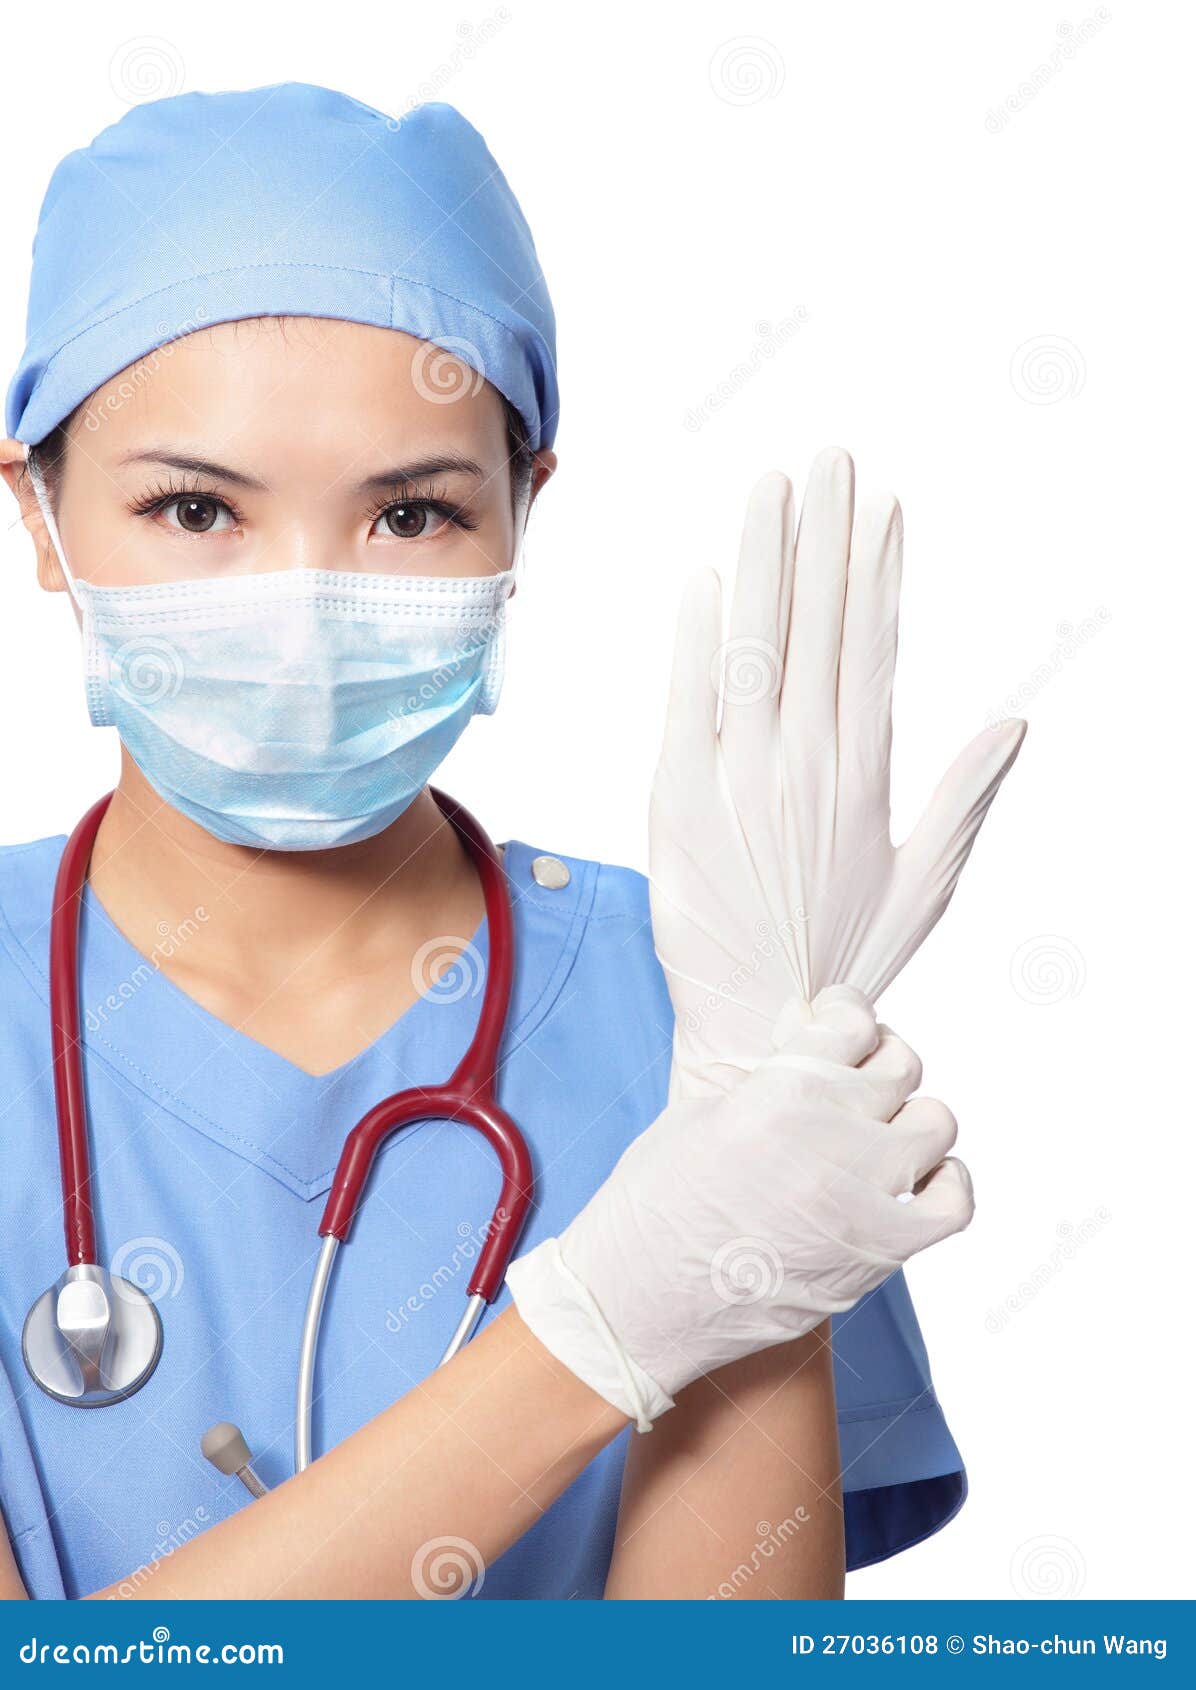 Surgical Glove, Surgical Glove Suppliers and Manufacturers ...